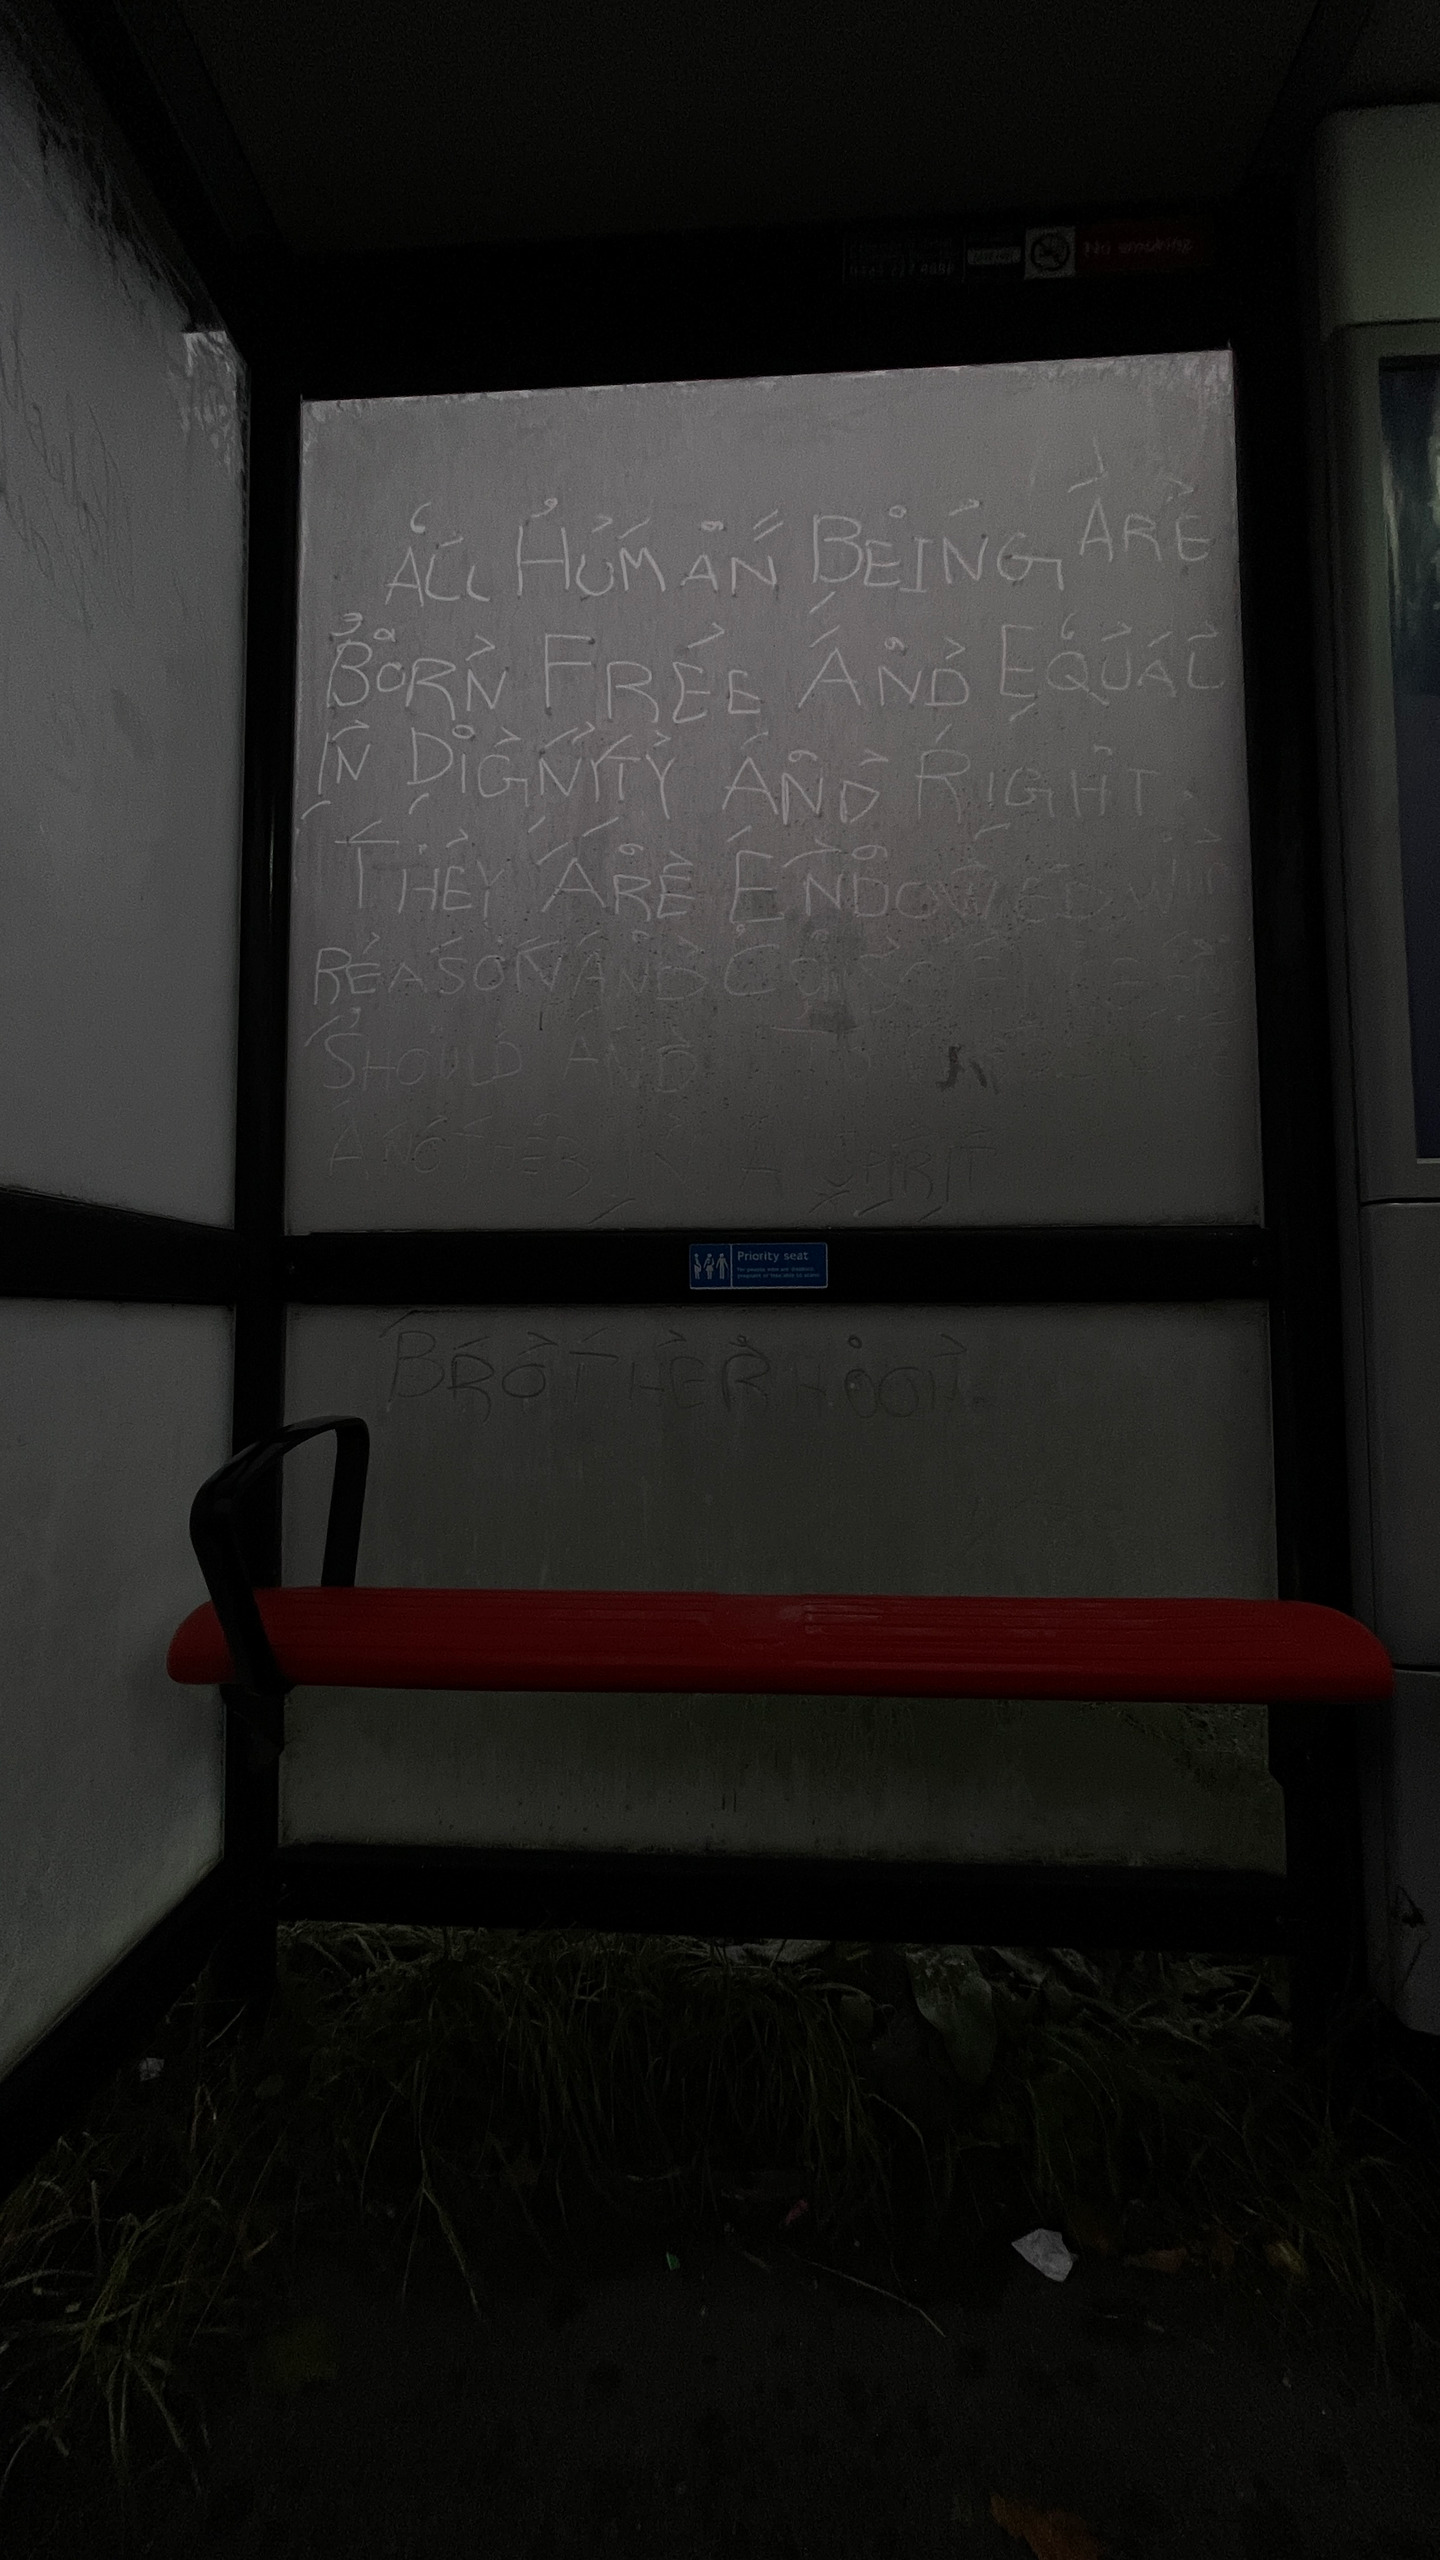 In this series, the UN's thirty fundamental human rights were inscribed on ice-covered glass sheets at London bus stations.